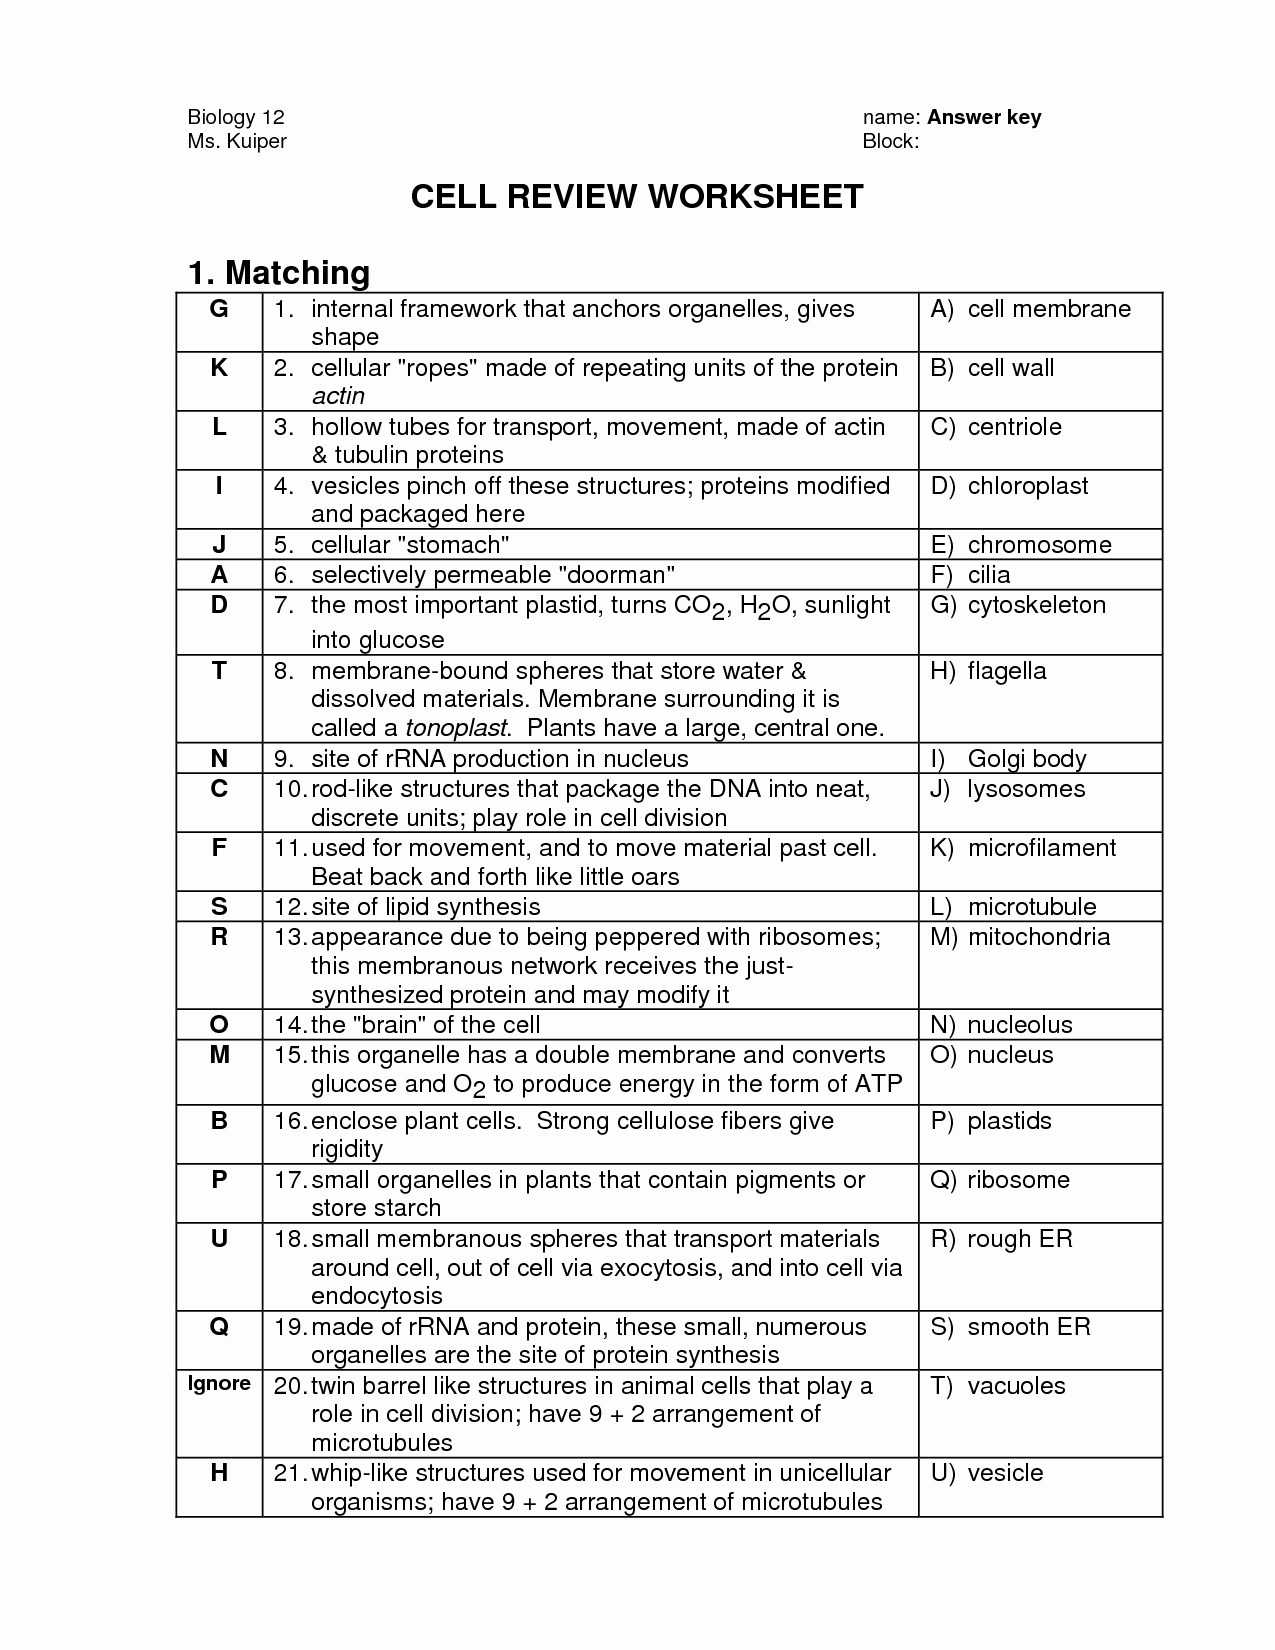 Cell organelles Worksheet as Well as organelles Worksheet Cell organelle Cadrecorner